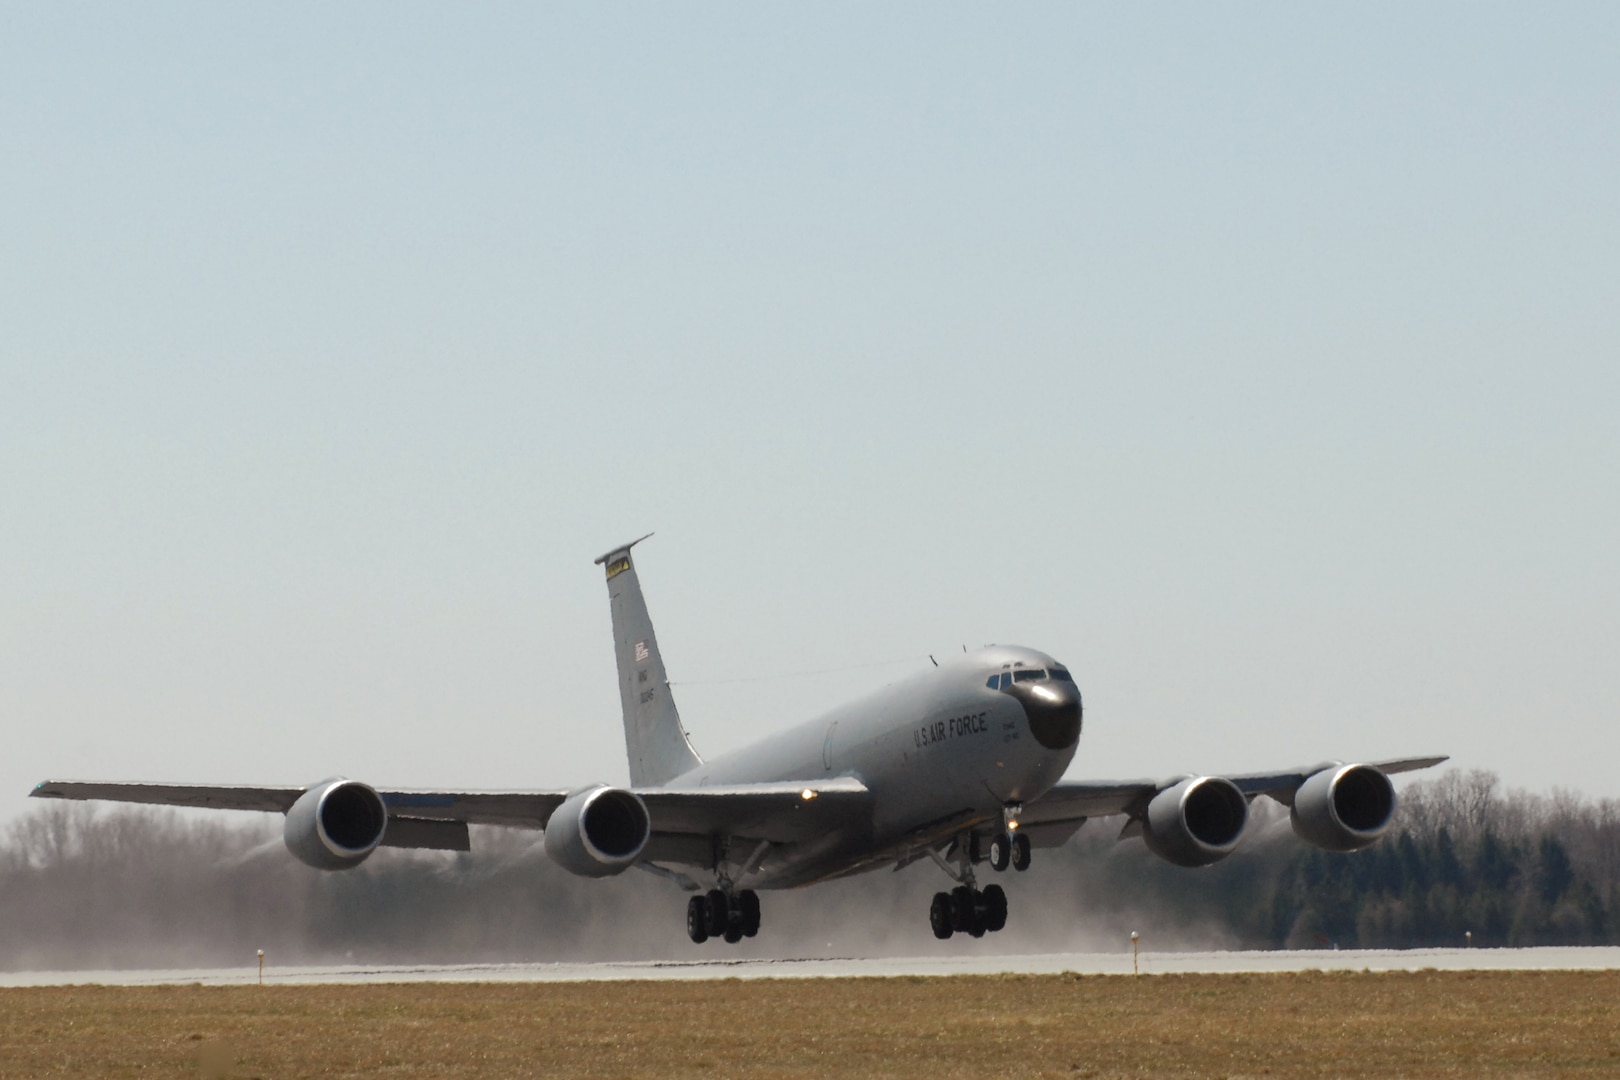 A KC-135 Stratotanker takes off from Selfridge Air National Guard Base, Mich., April 14, 2011. The Air National Guard provides about half of all the air refueling capability in the Air Force. This aircraft is operated by the 127th Air Refueling Group of the Michigan Air National Guard.